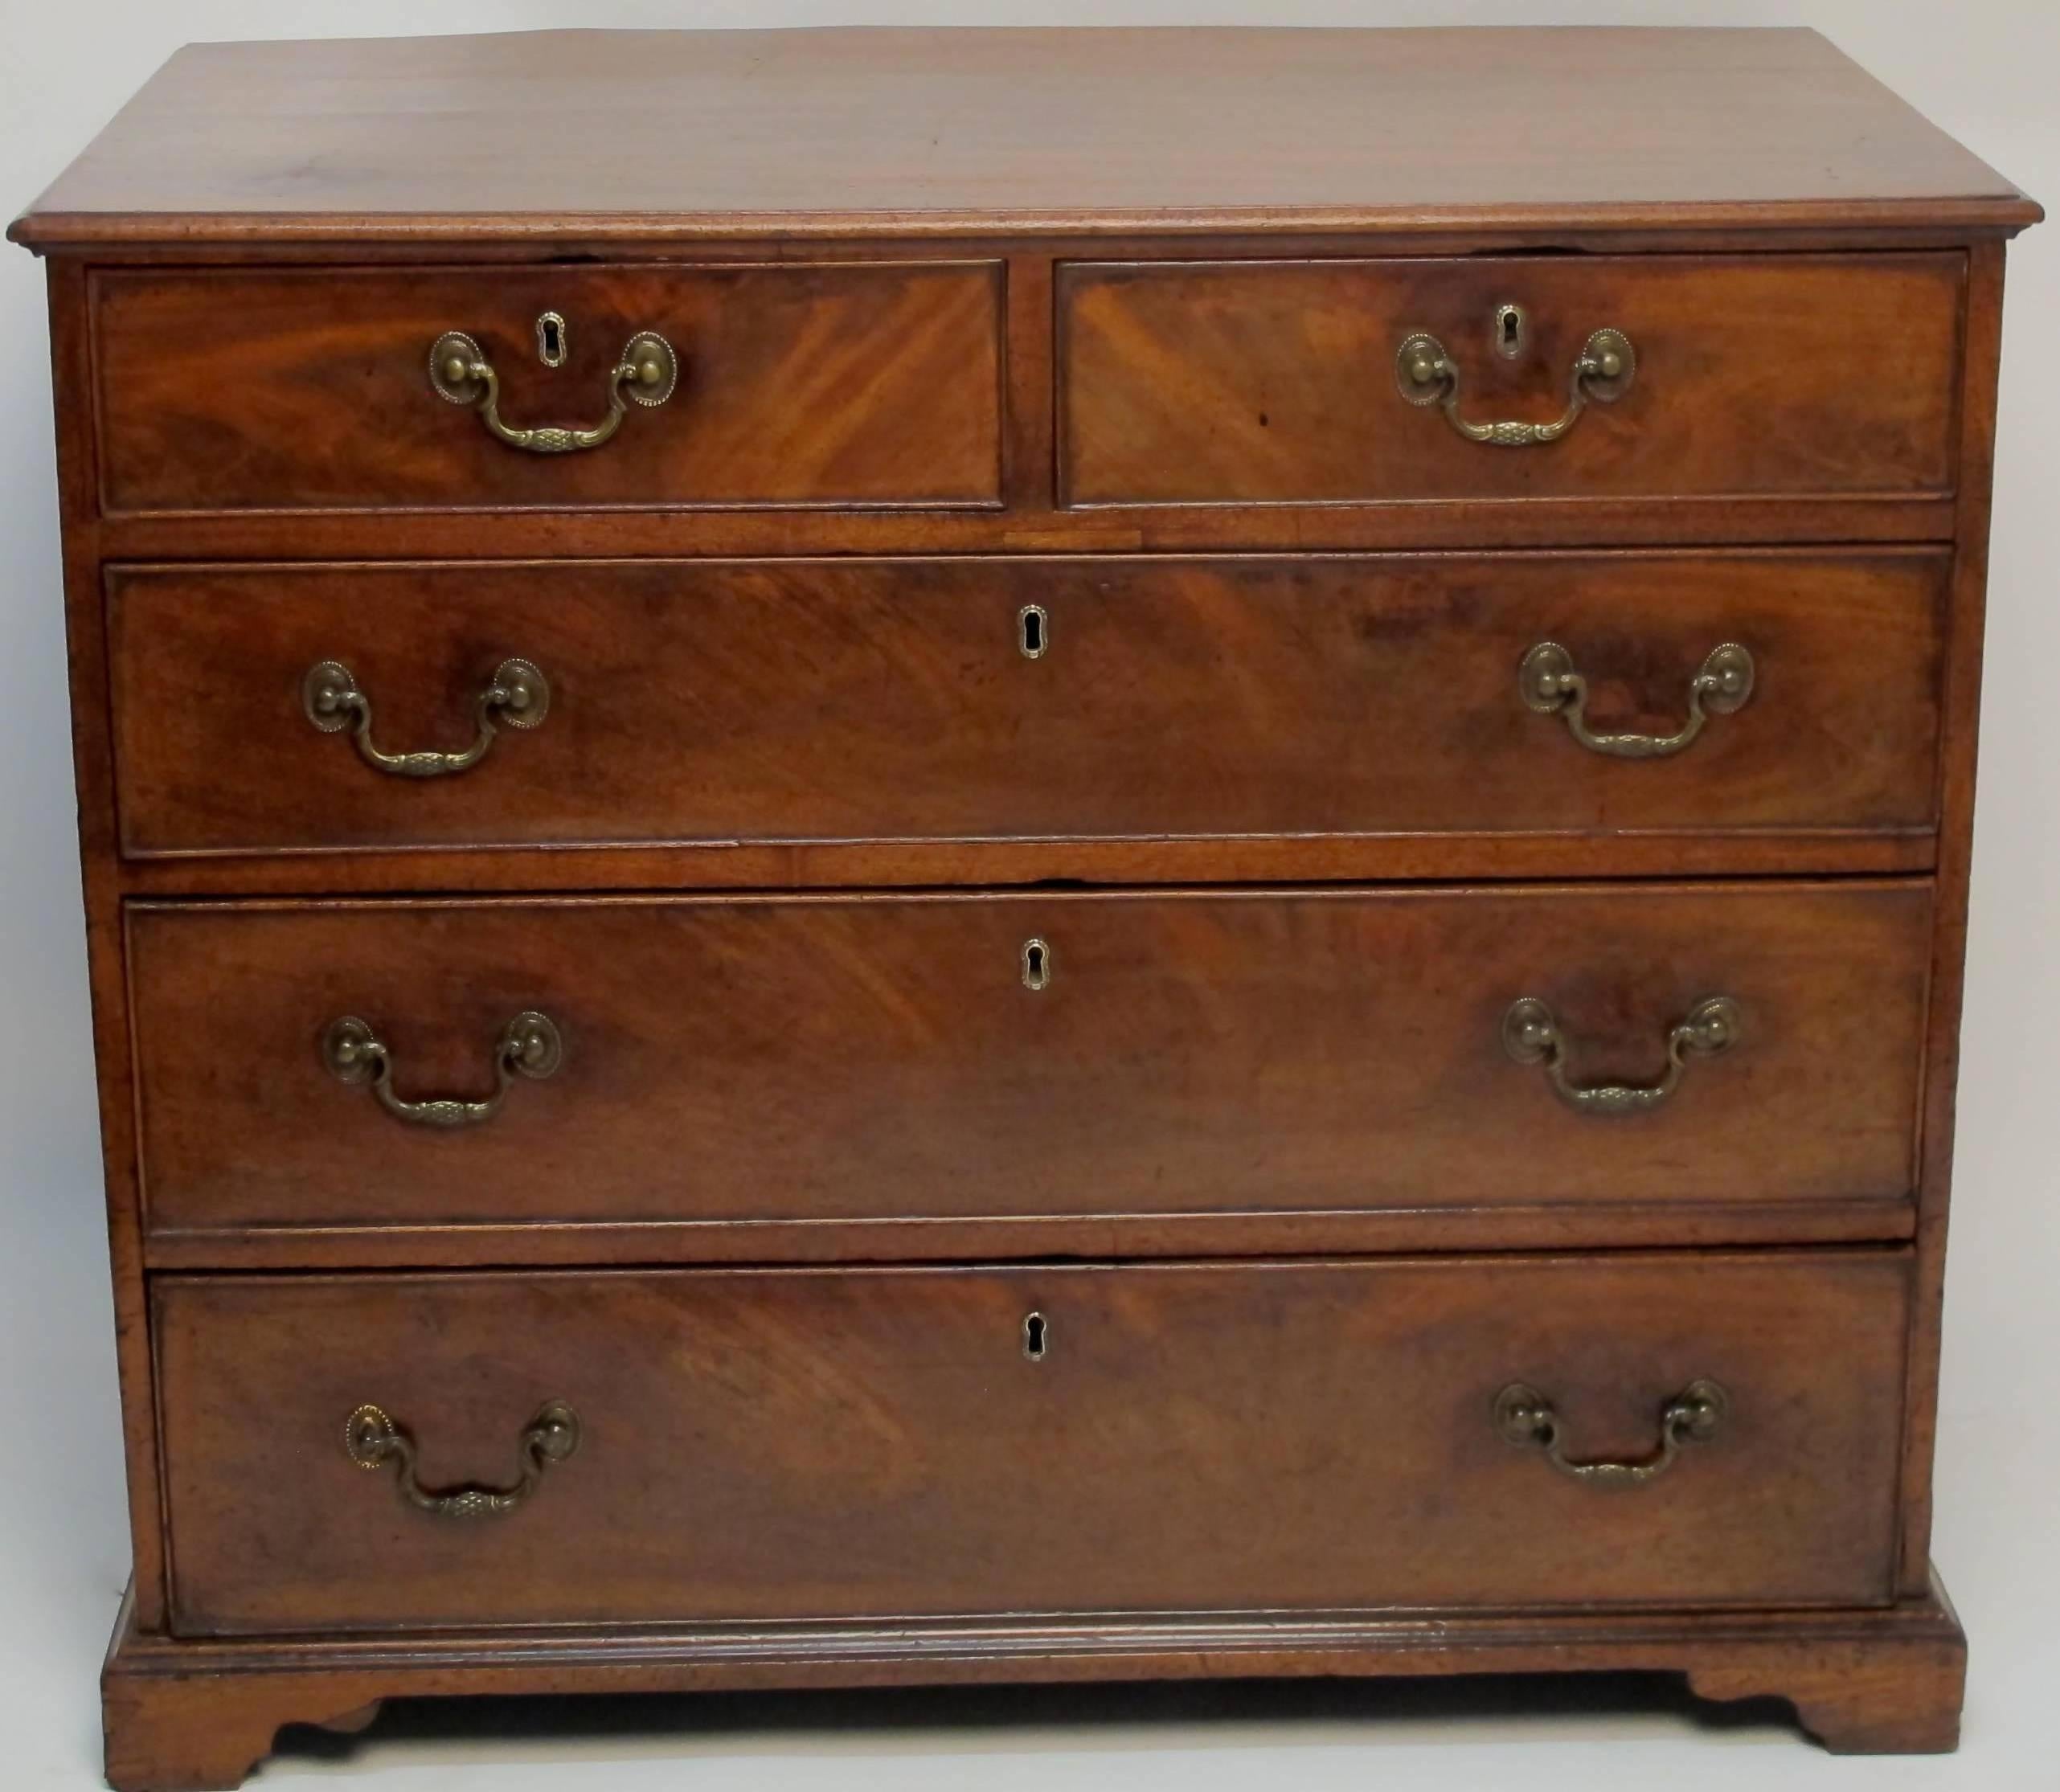 George III mahogany chest of drawers with two short drawers over three graduated drawers having figured mahogany drawer fronts. Sitting on bracket feet and having original drawer pulls, English, circa 1820.
There have been restorations and